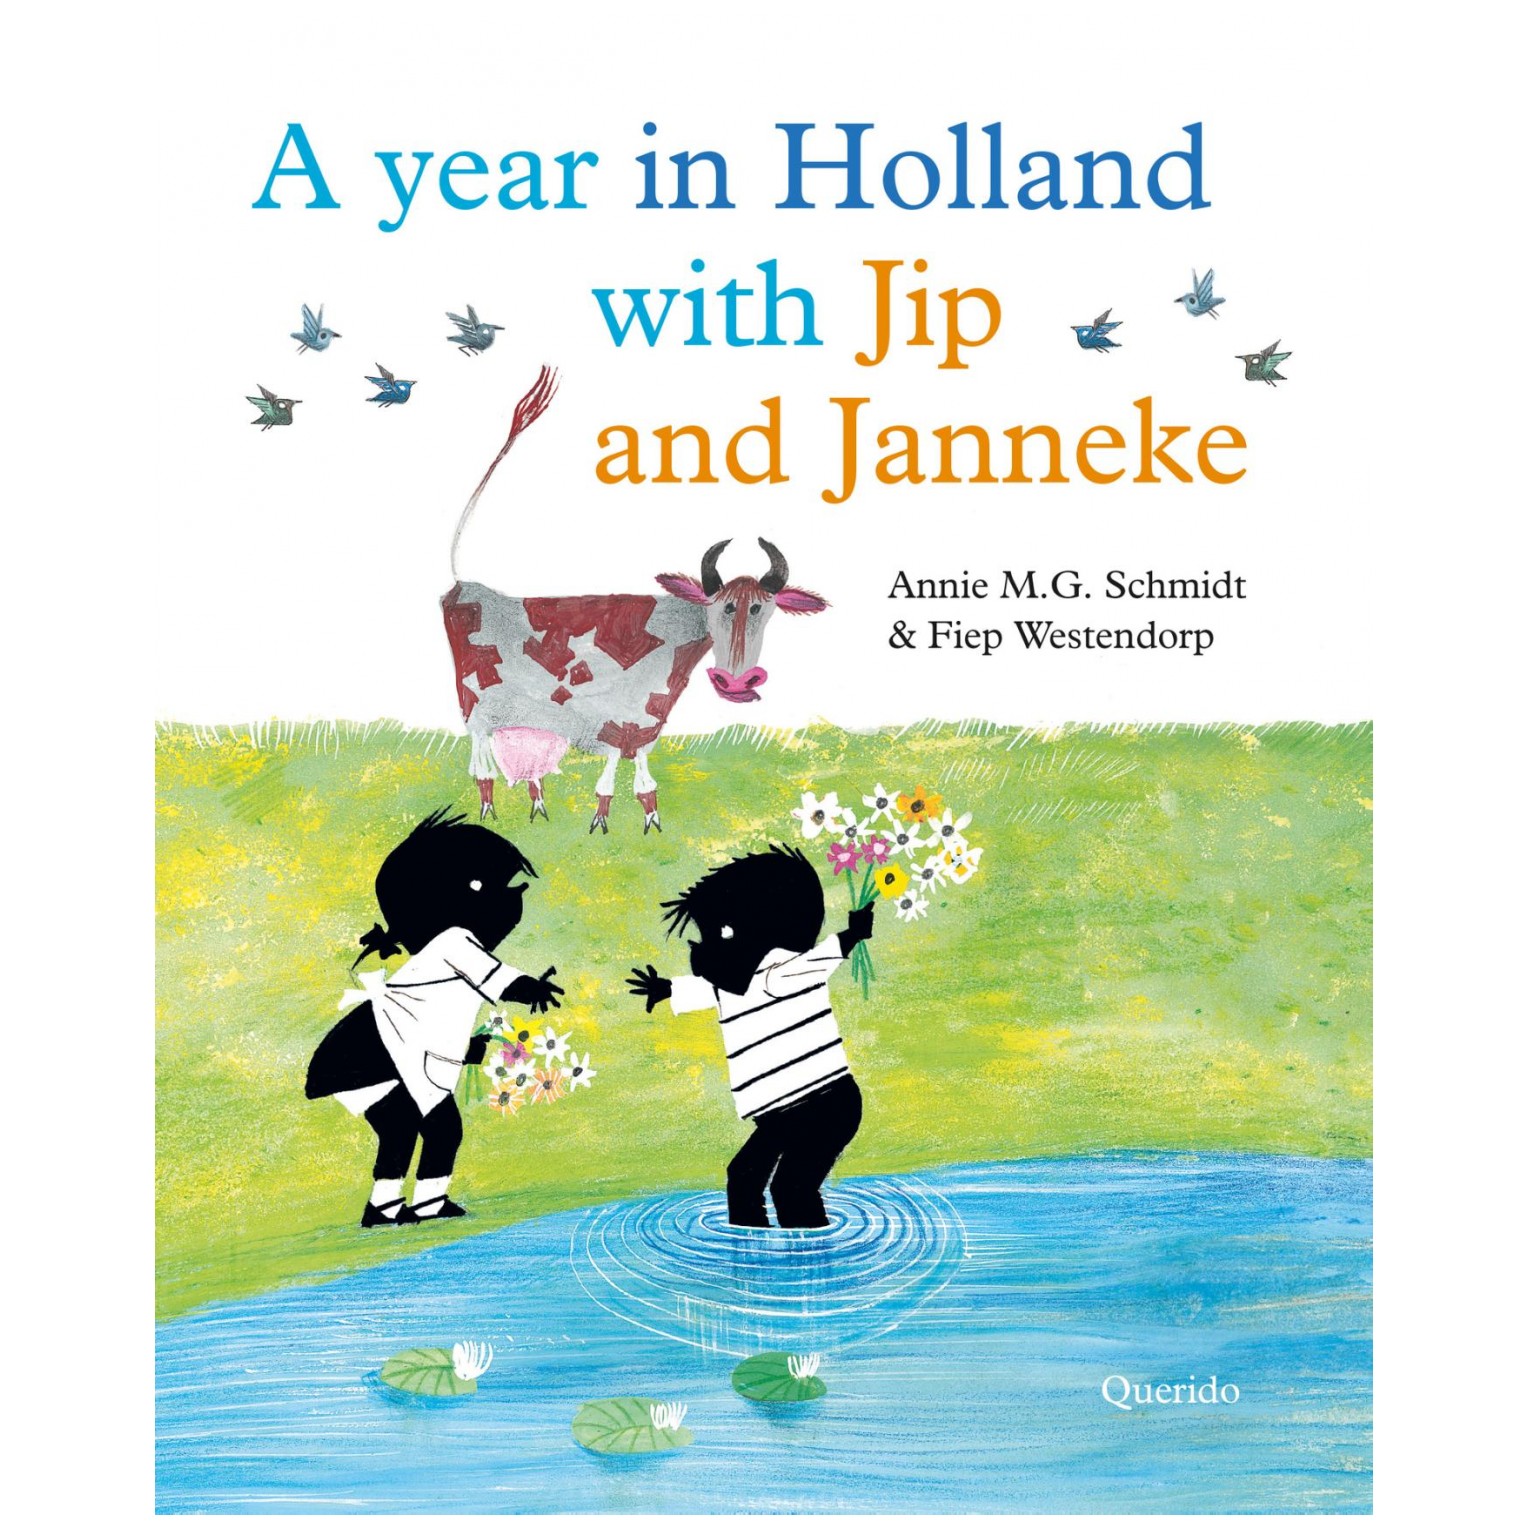 A Year in Holland with Jip and Janneke